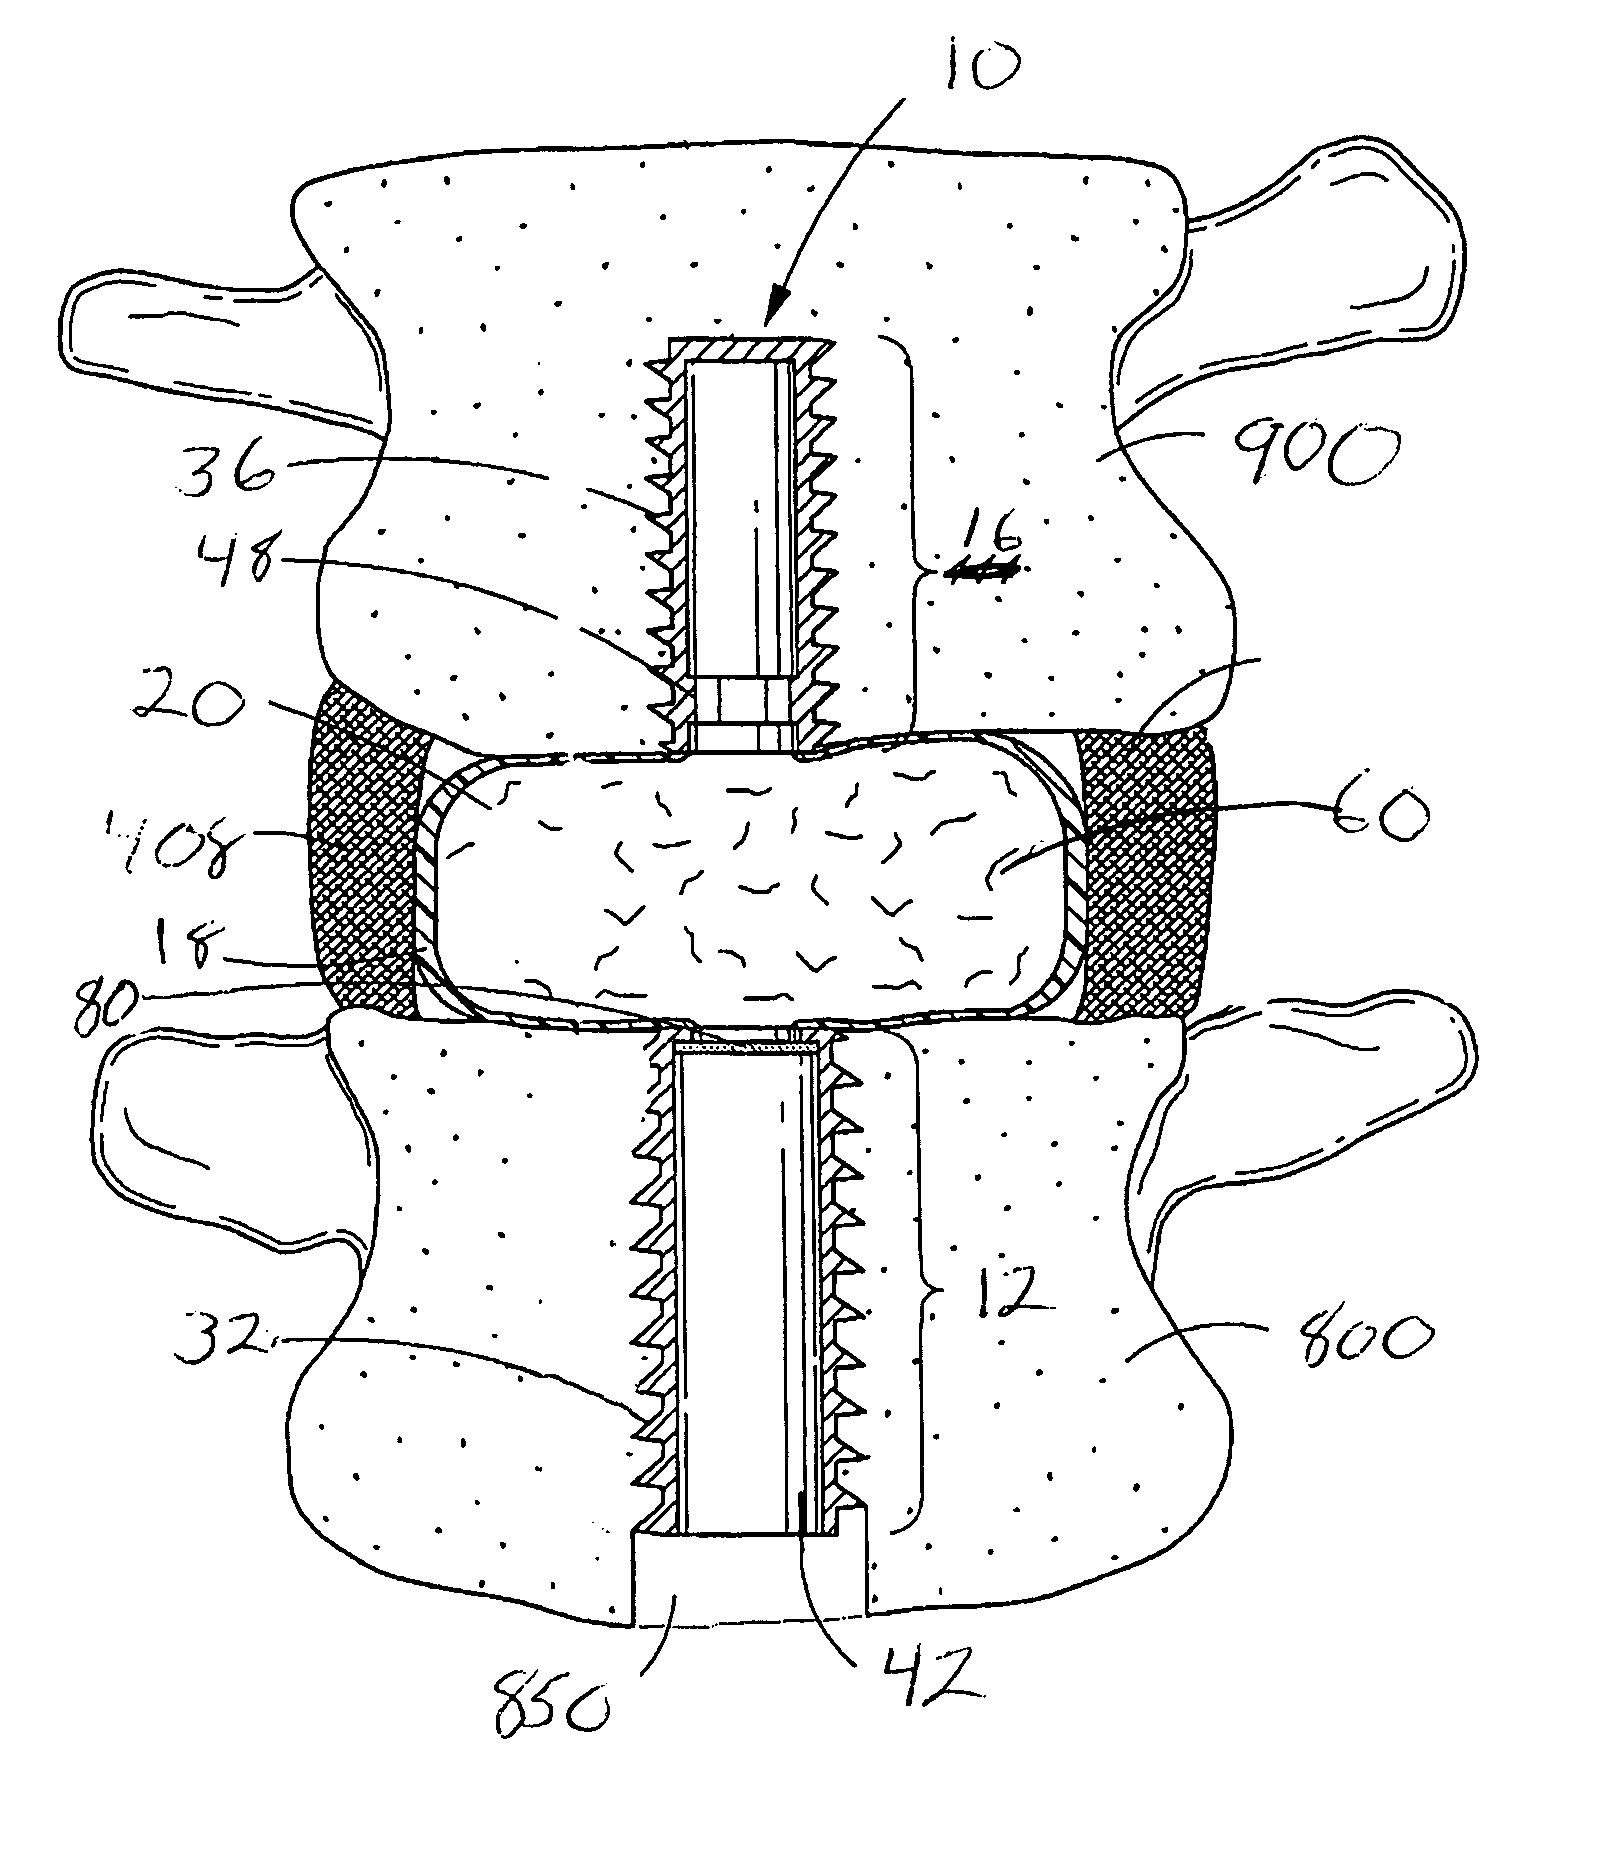 Spinal mobility preservation apparatus